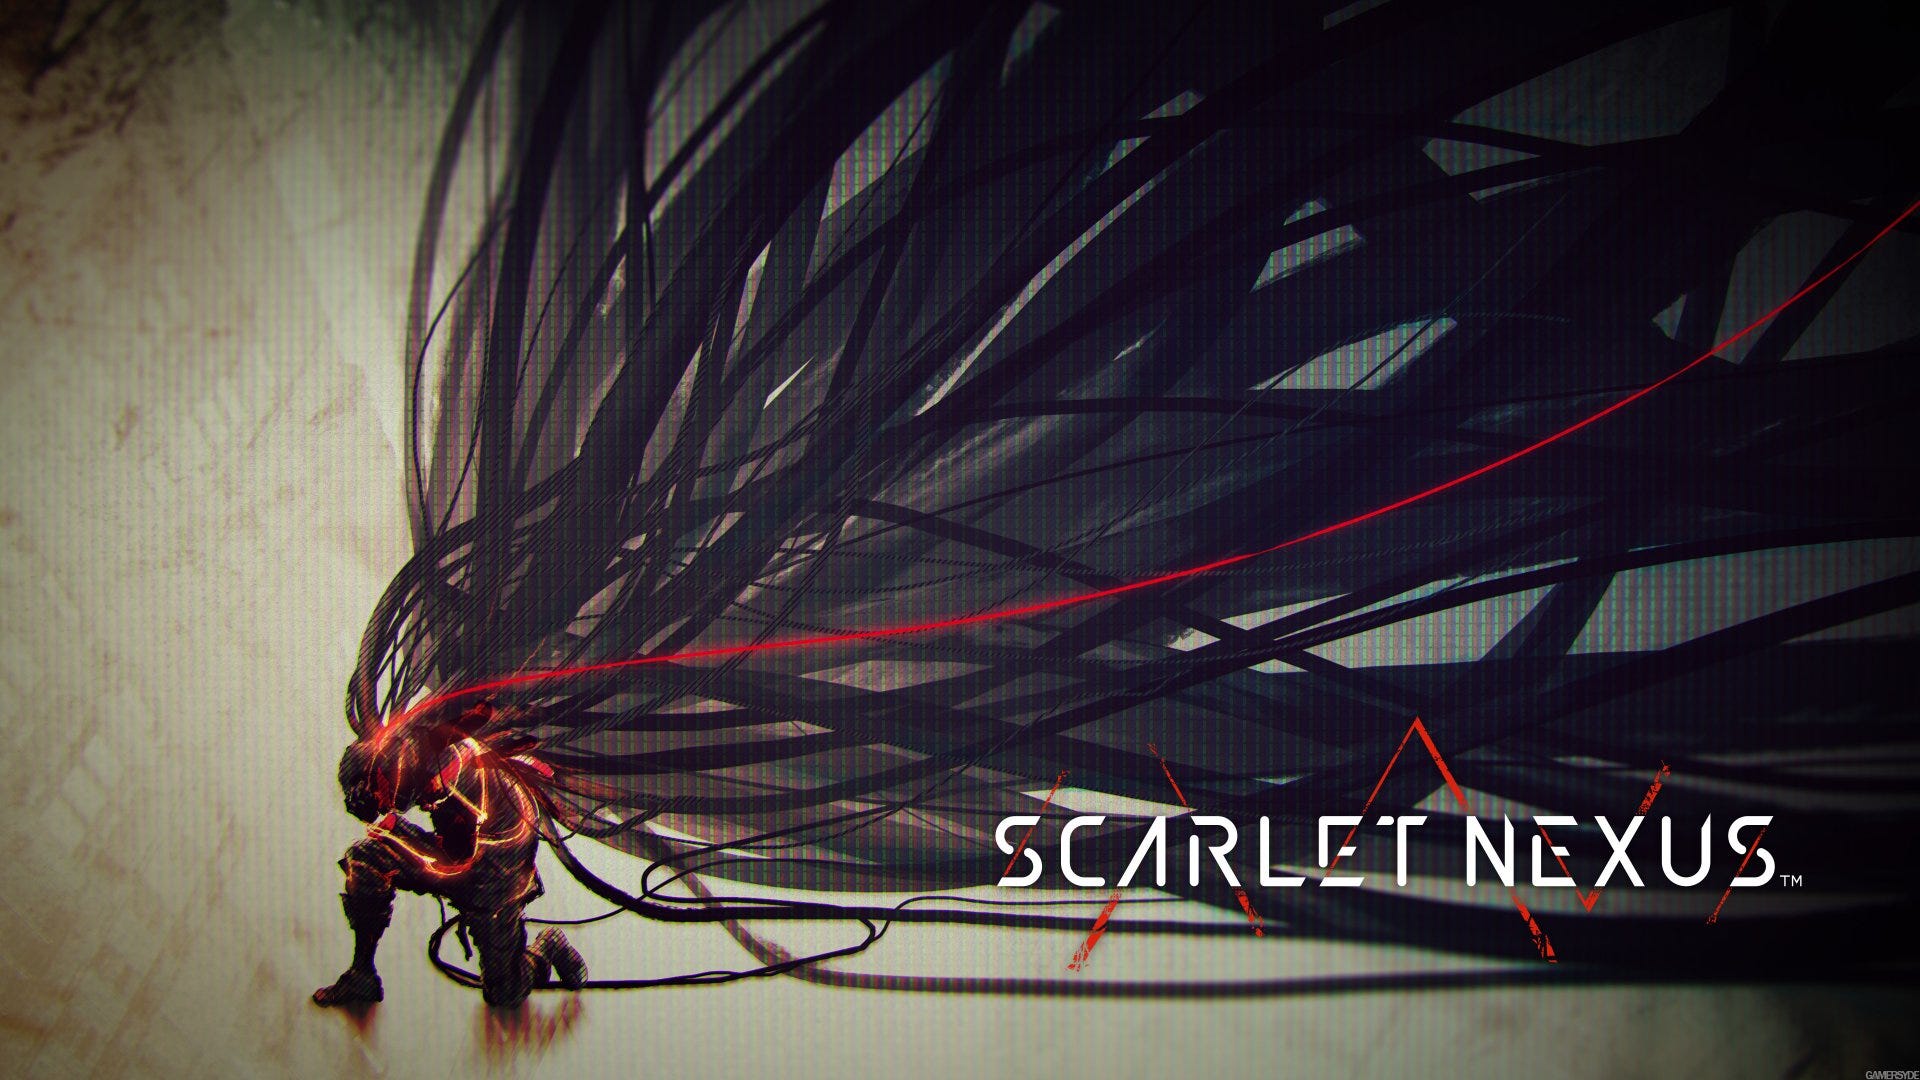 How long is the Scarlet Nexus route?